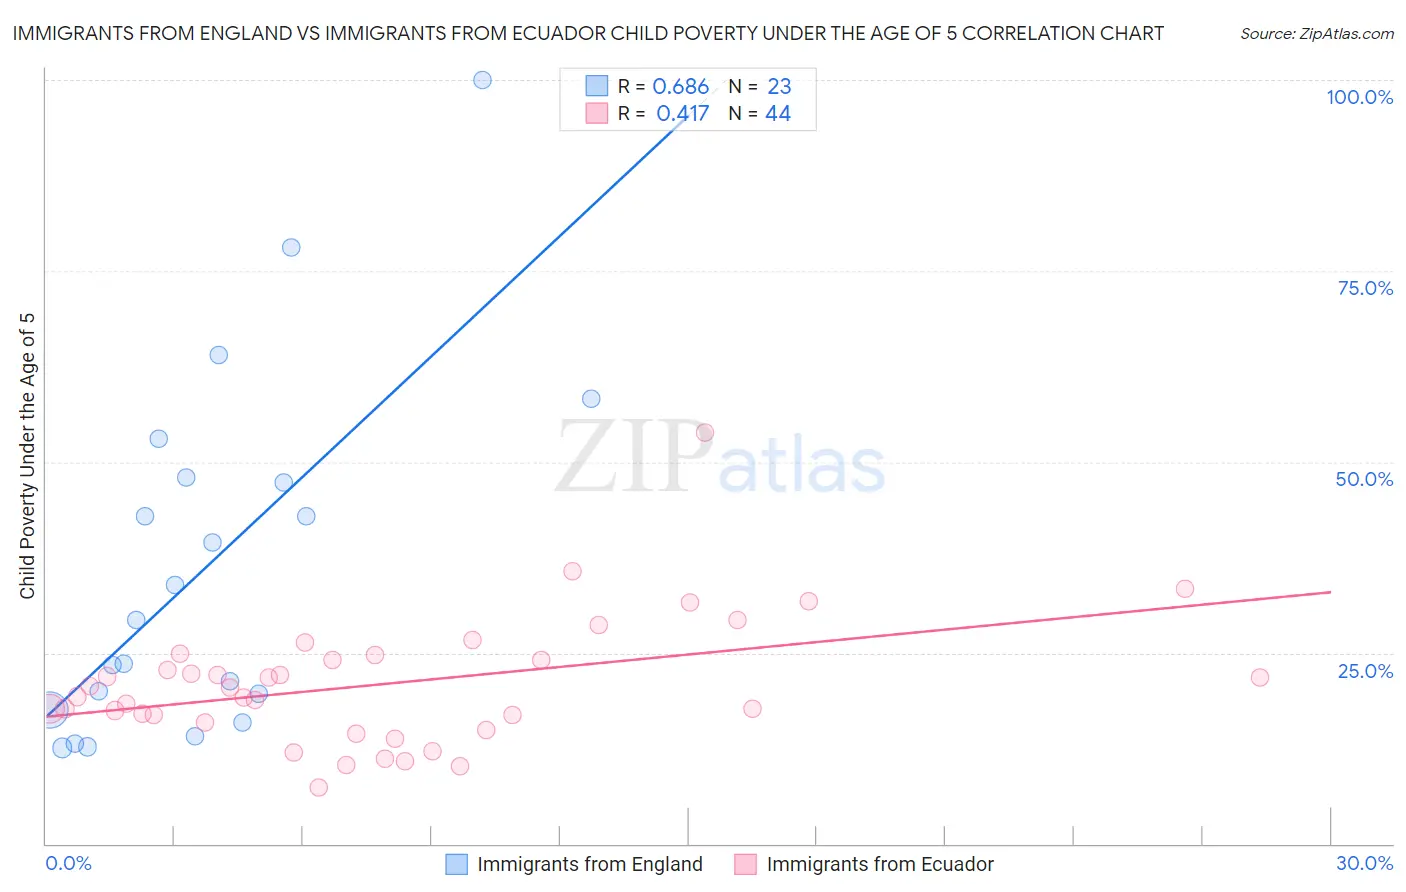 Immigrants from England vs Immigrants from Ecuador Child Poverty Under the Age of 5